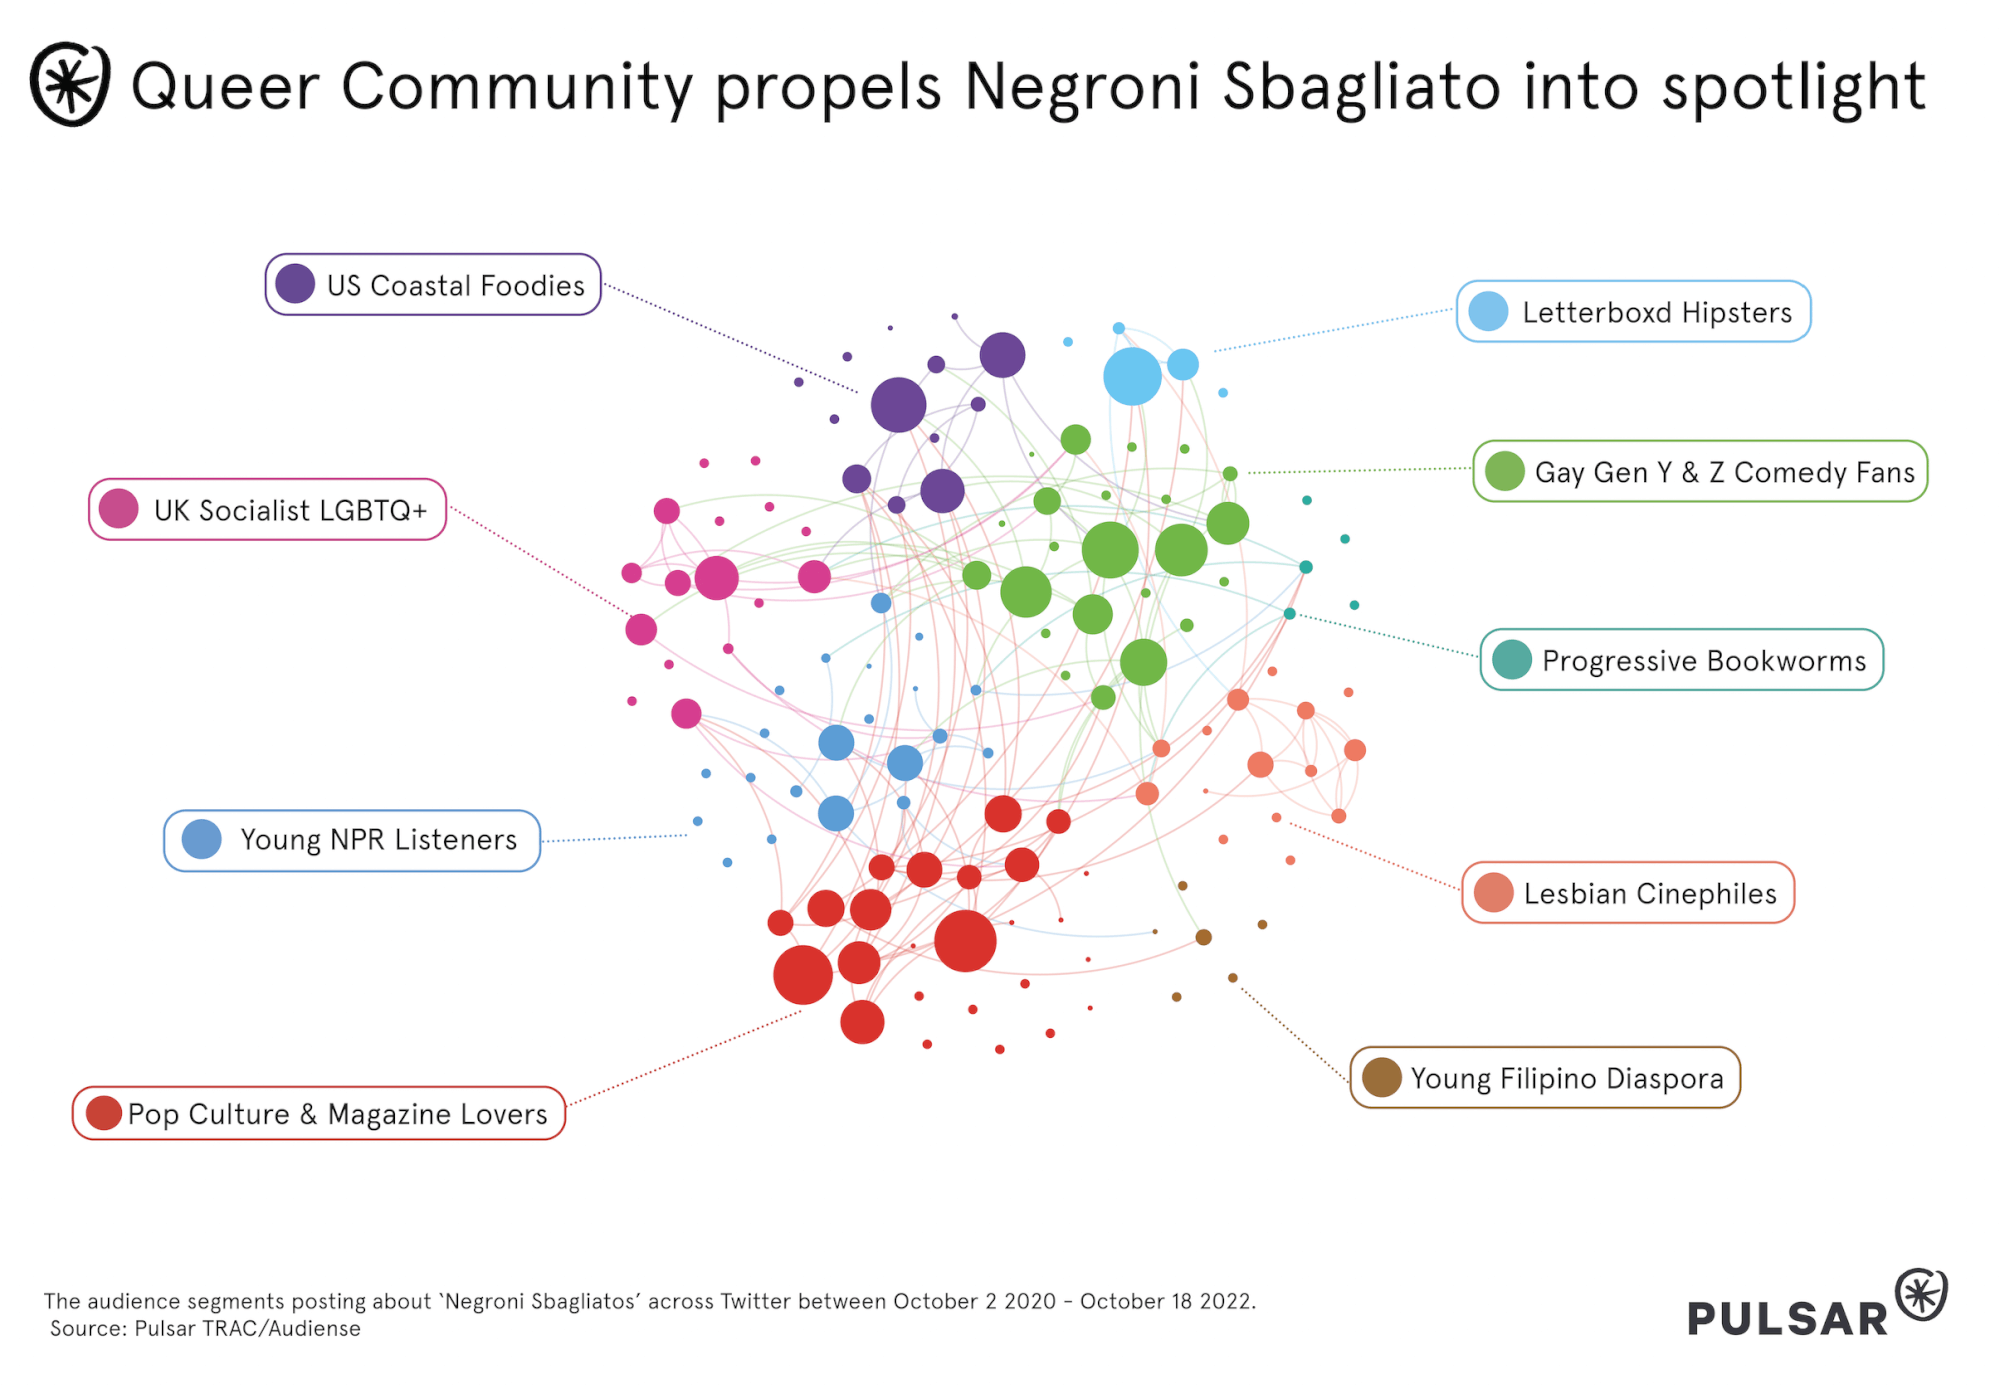 Which communities are talking about Negroni Sbagliatos?